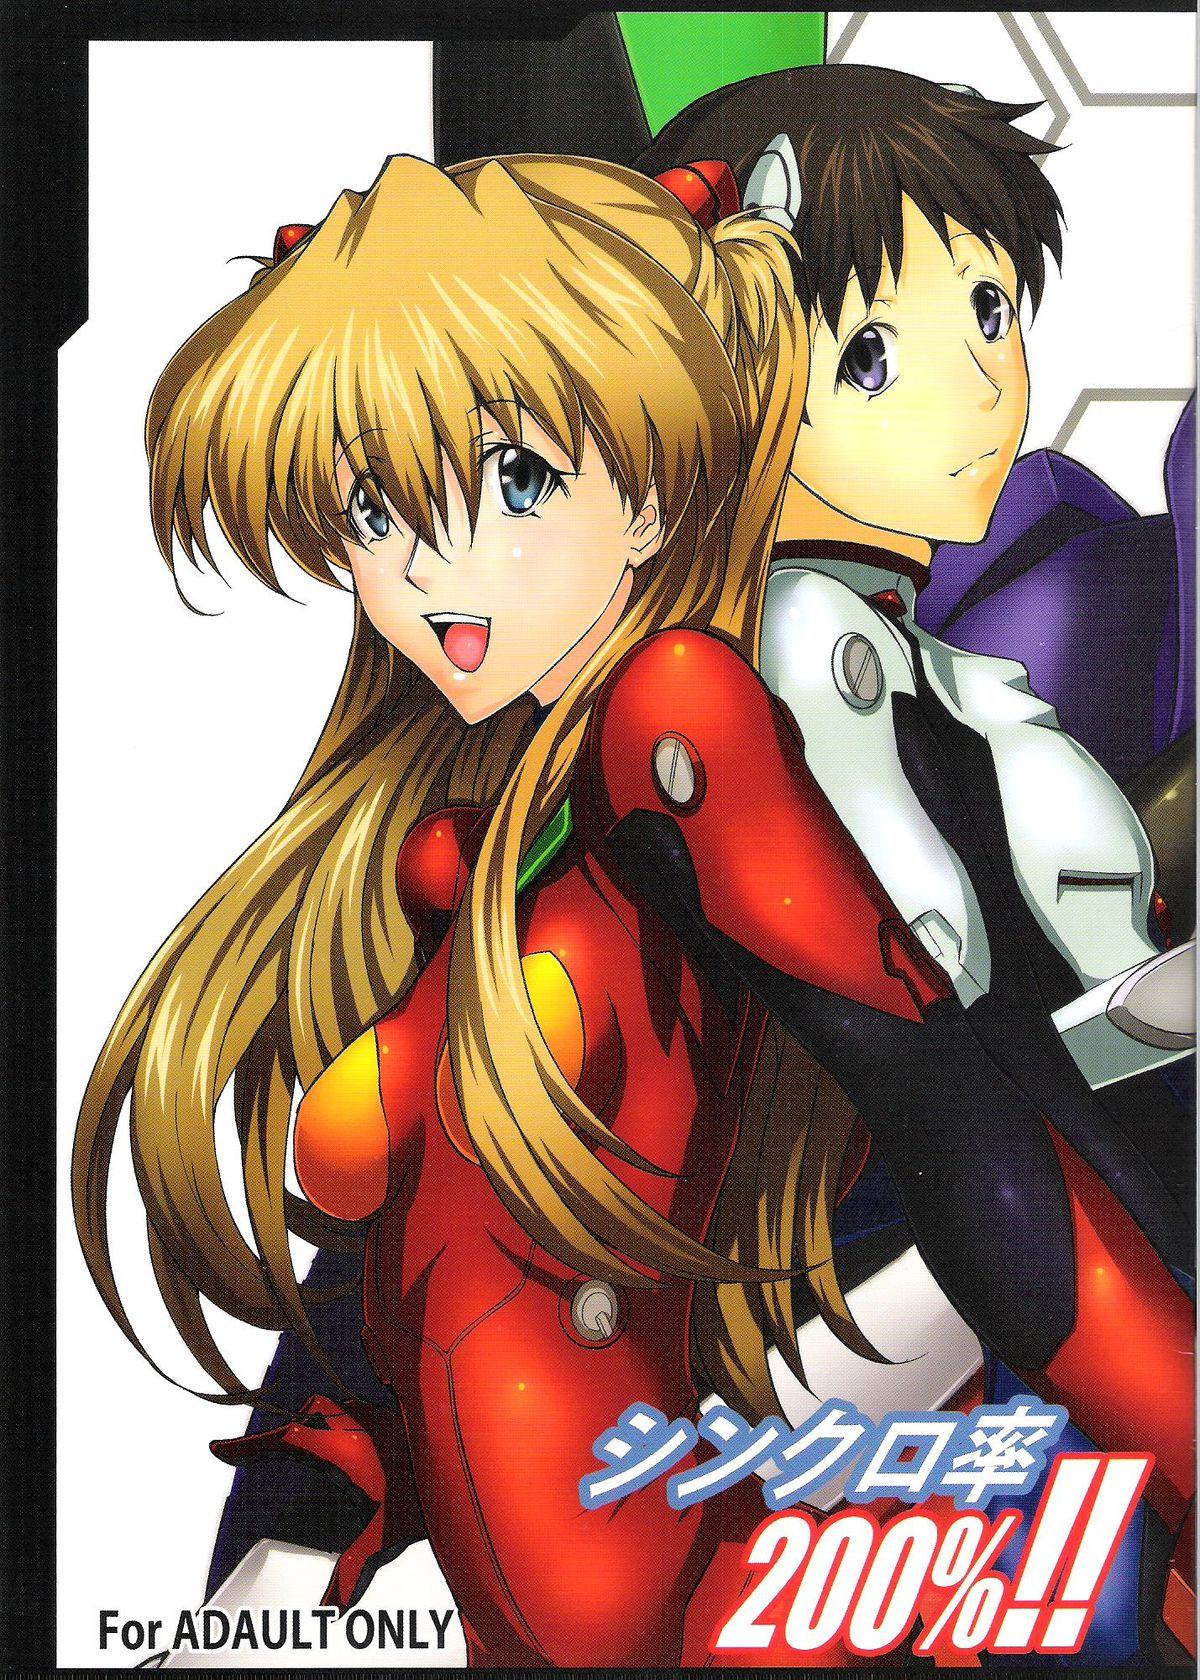 Asia Synchro Rate 200% !! - Neon genesis evangelion Soloboy - Picture 1